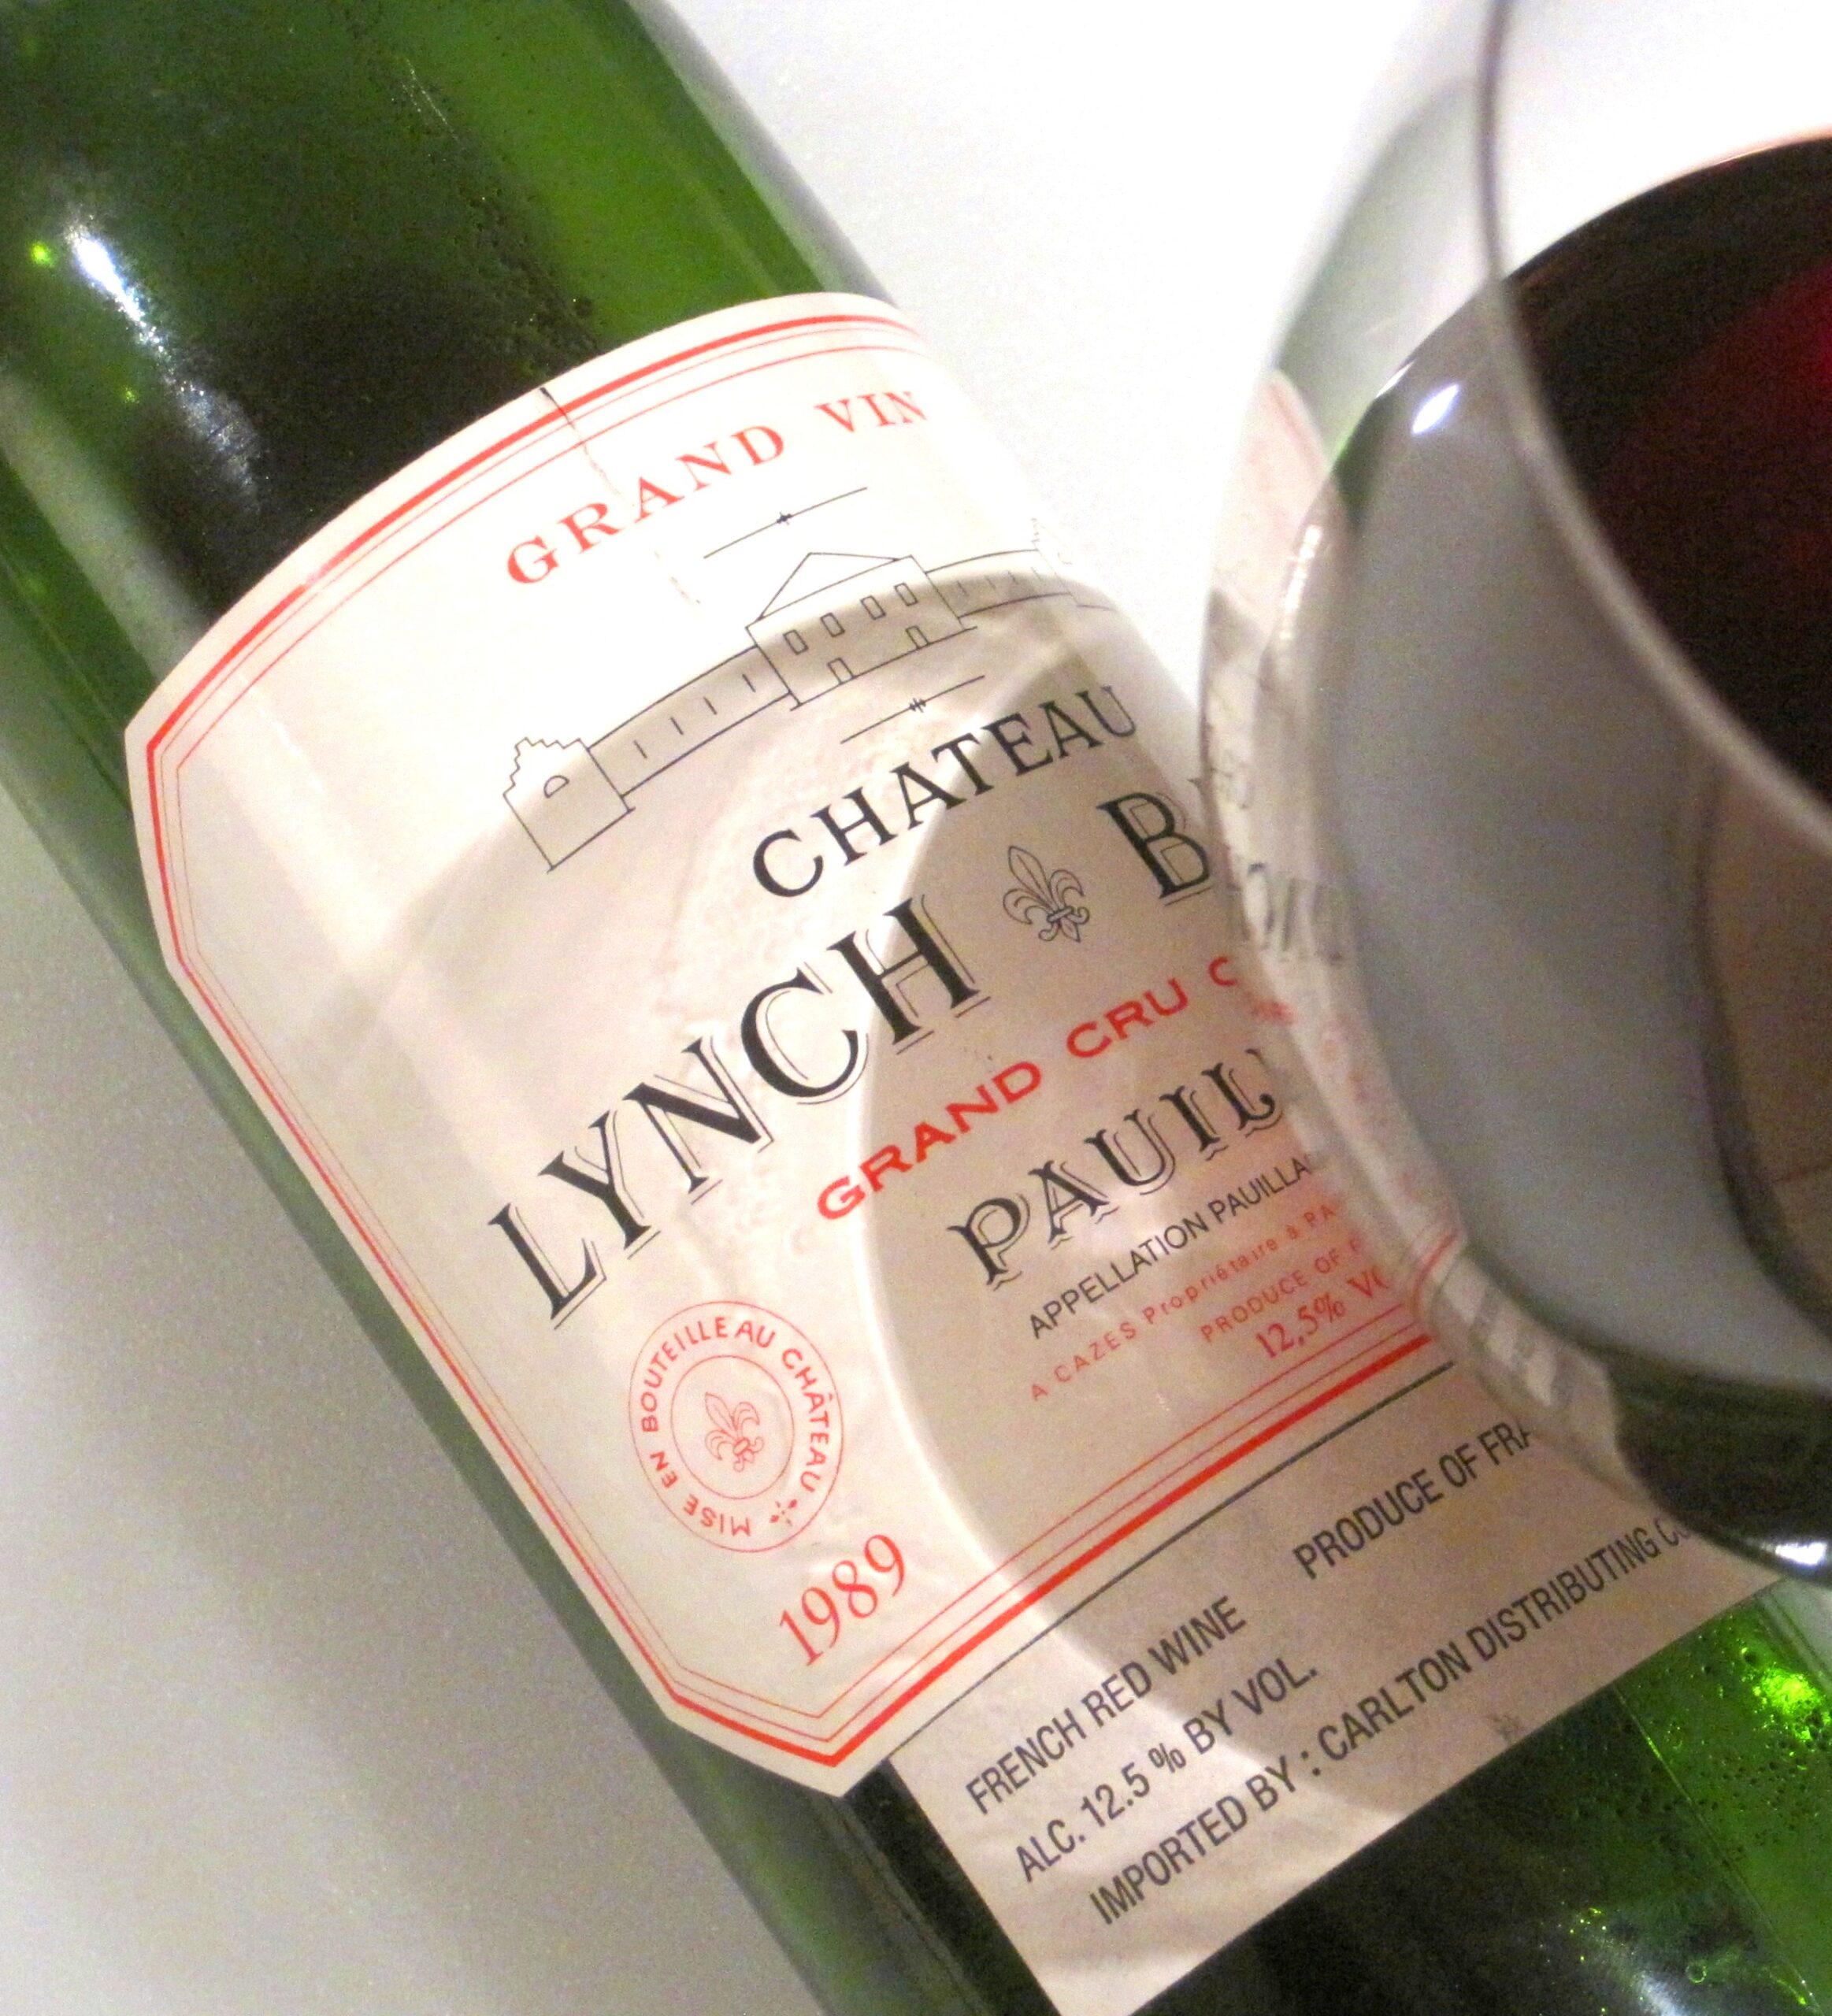 1989 Lynch Bages coats your mouth with chocolate covered cassis